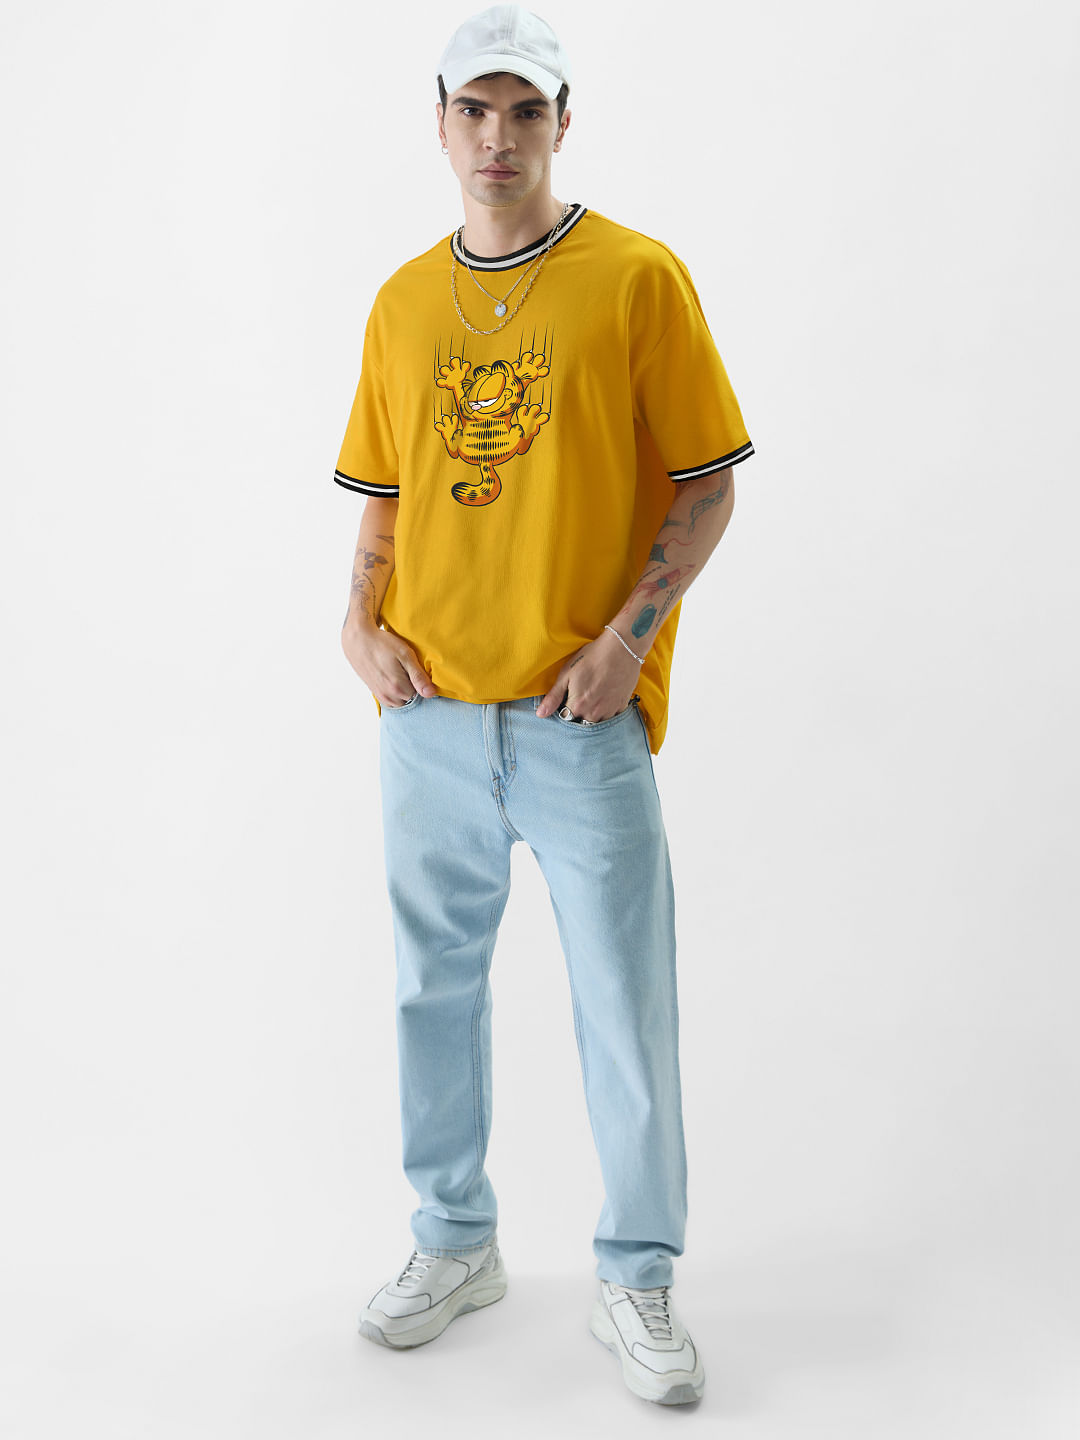 Buy Garfield Clingy Oversized T-shirt Online.